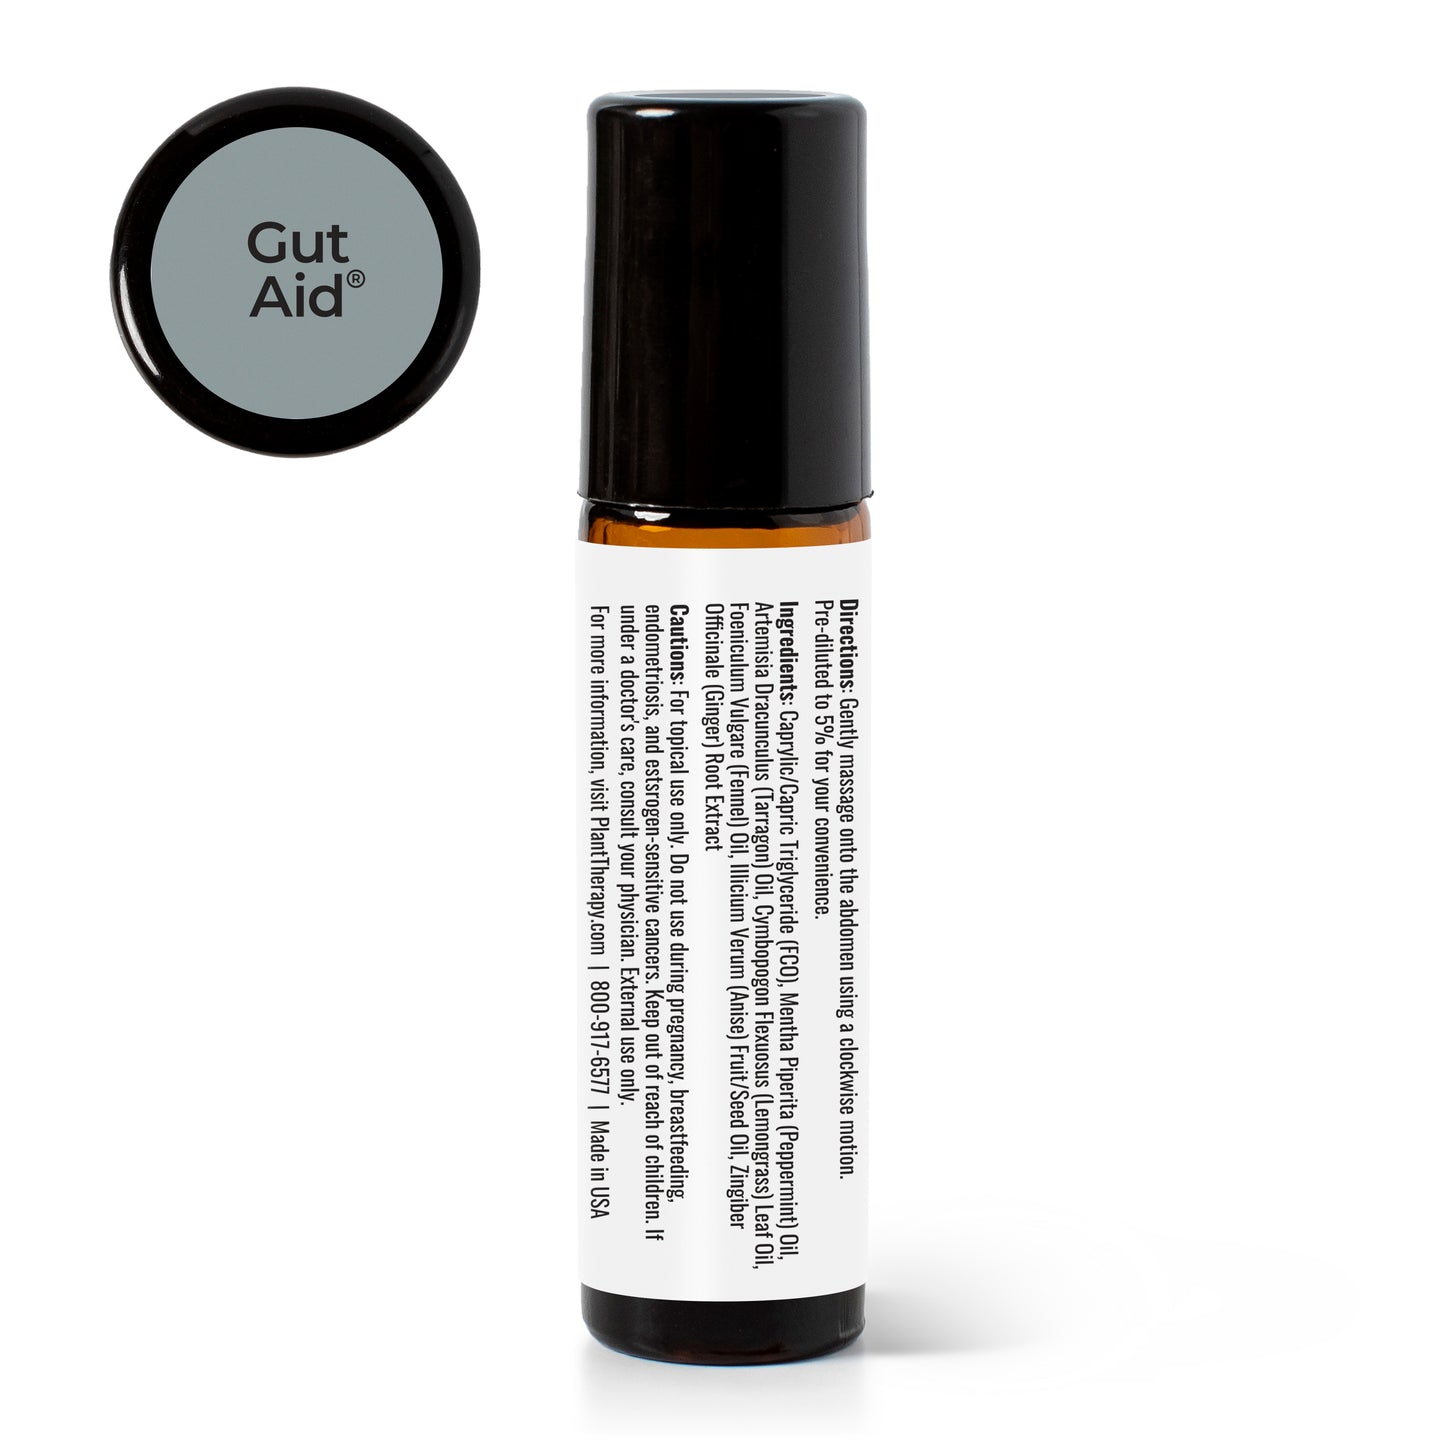 Gut Aid™ Essential Oil Blend Pre-Diluted Roll-On